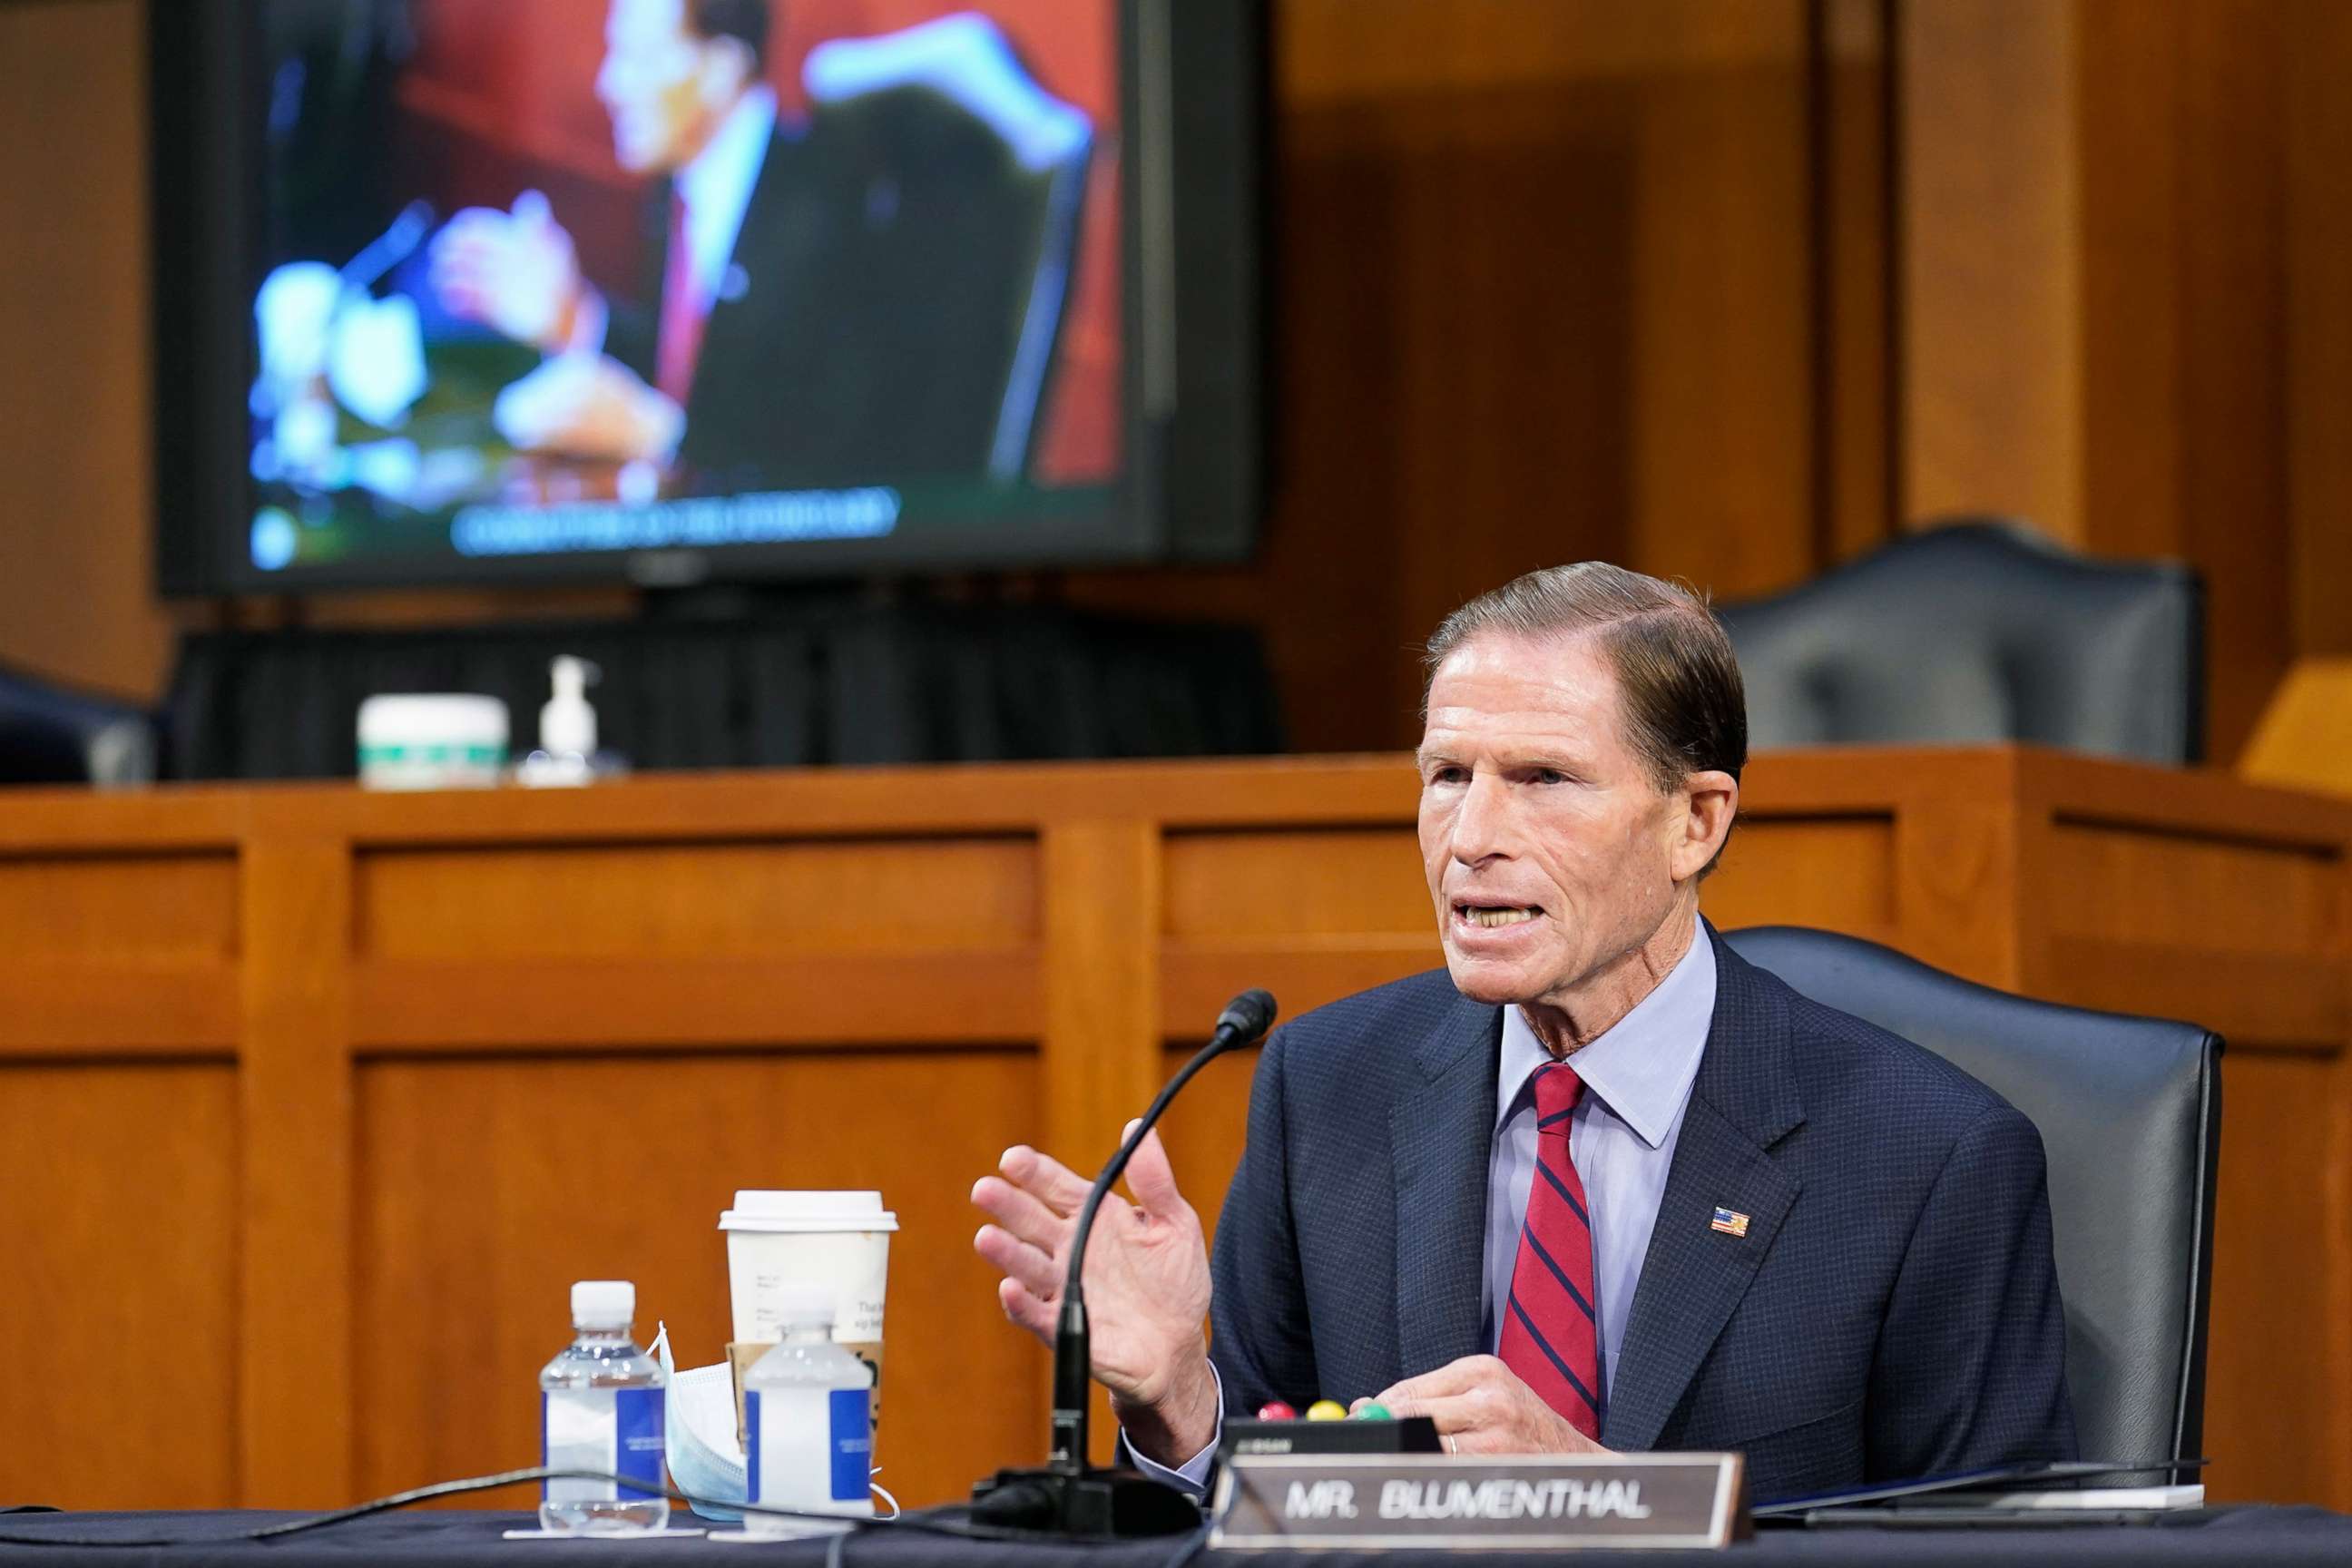 PHOTO: Sen. Richard Blumenthal speaks before the Senate Judiciary Committee during the confirmation hearing for Supreme Court nominee Amy Coney Barrett, Oct. 15, 2020 in Washington.  